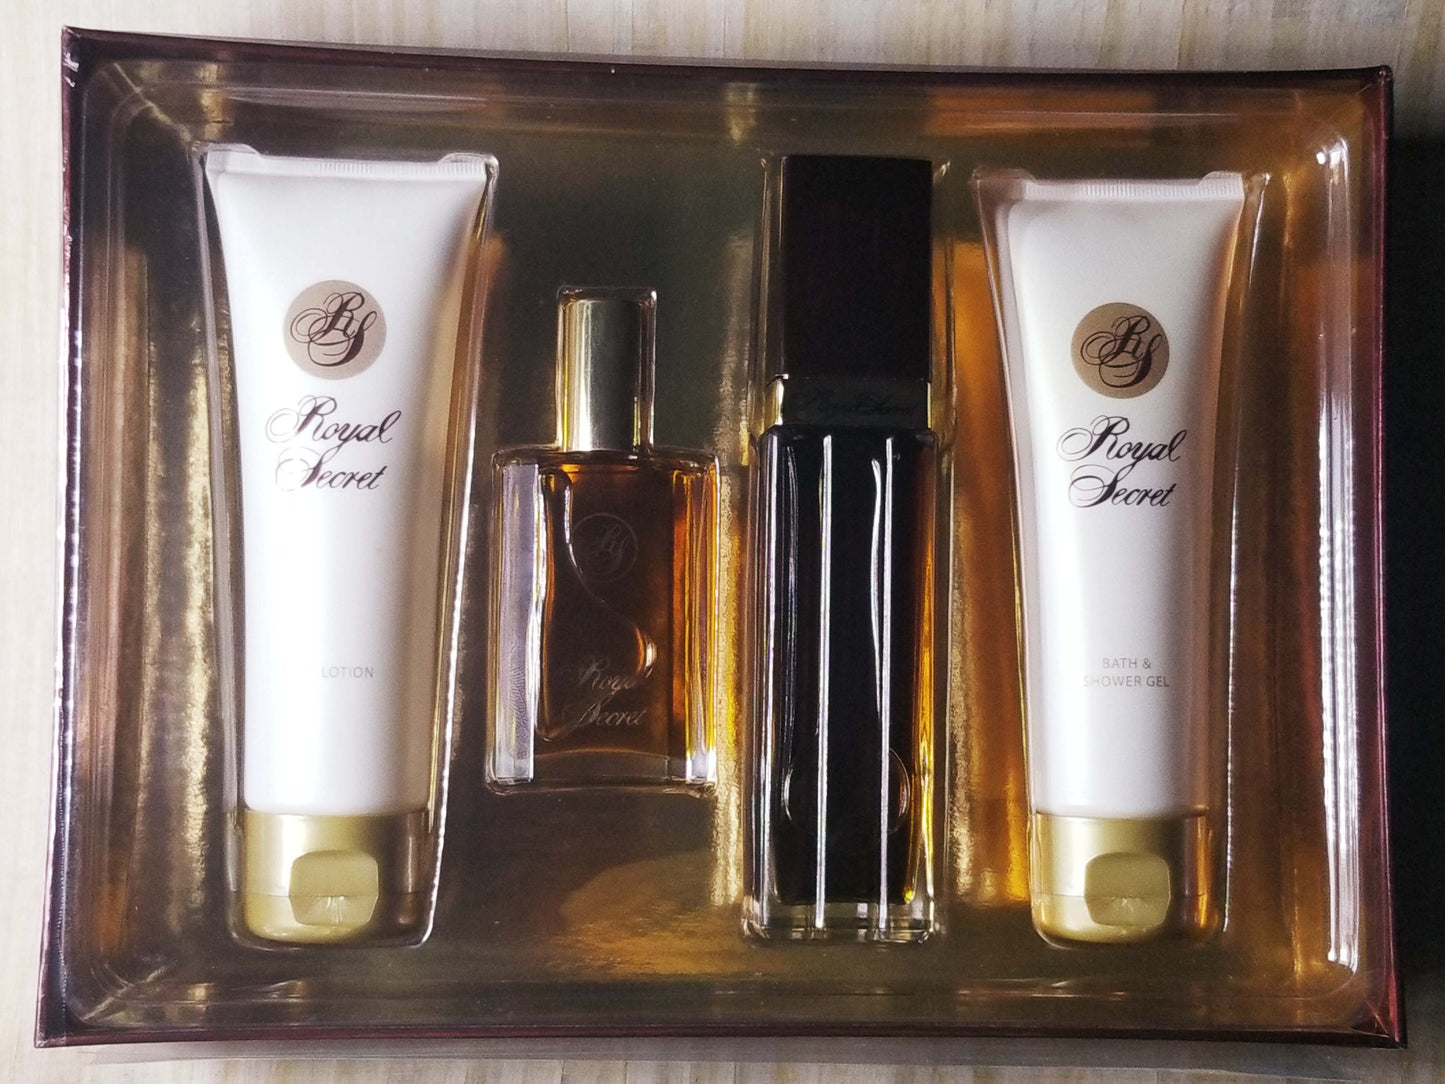 Royal Secret Germaine Monteil By Five Star for women 4-Piece Gift Set New In Box, 100 ml SPRAY CONCENTRE, Vintage